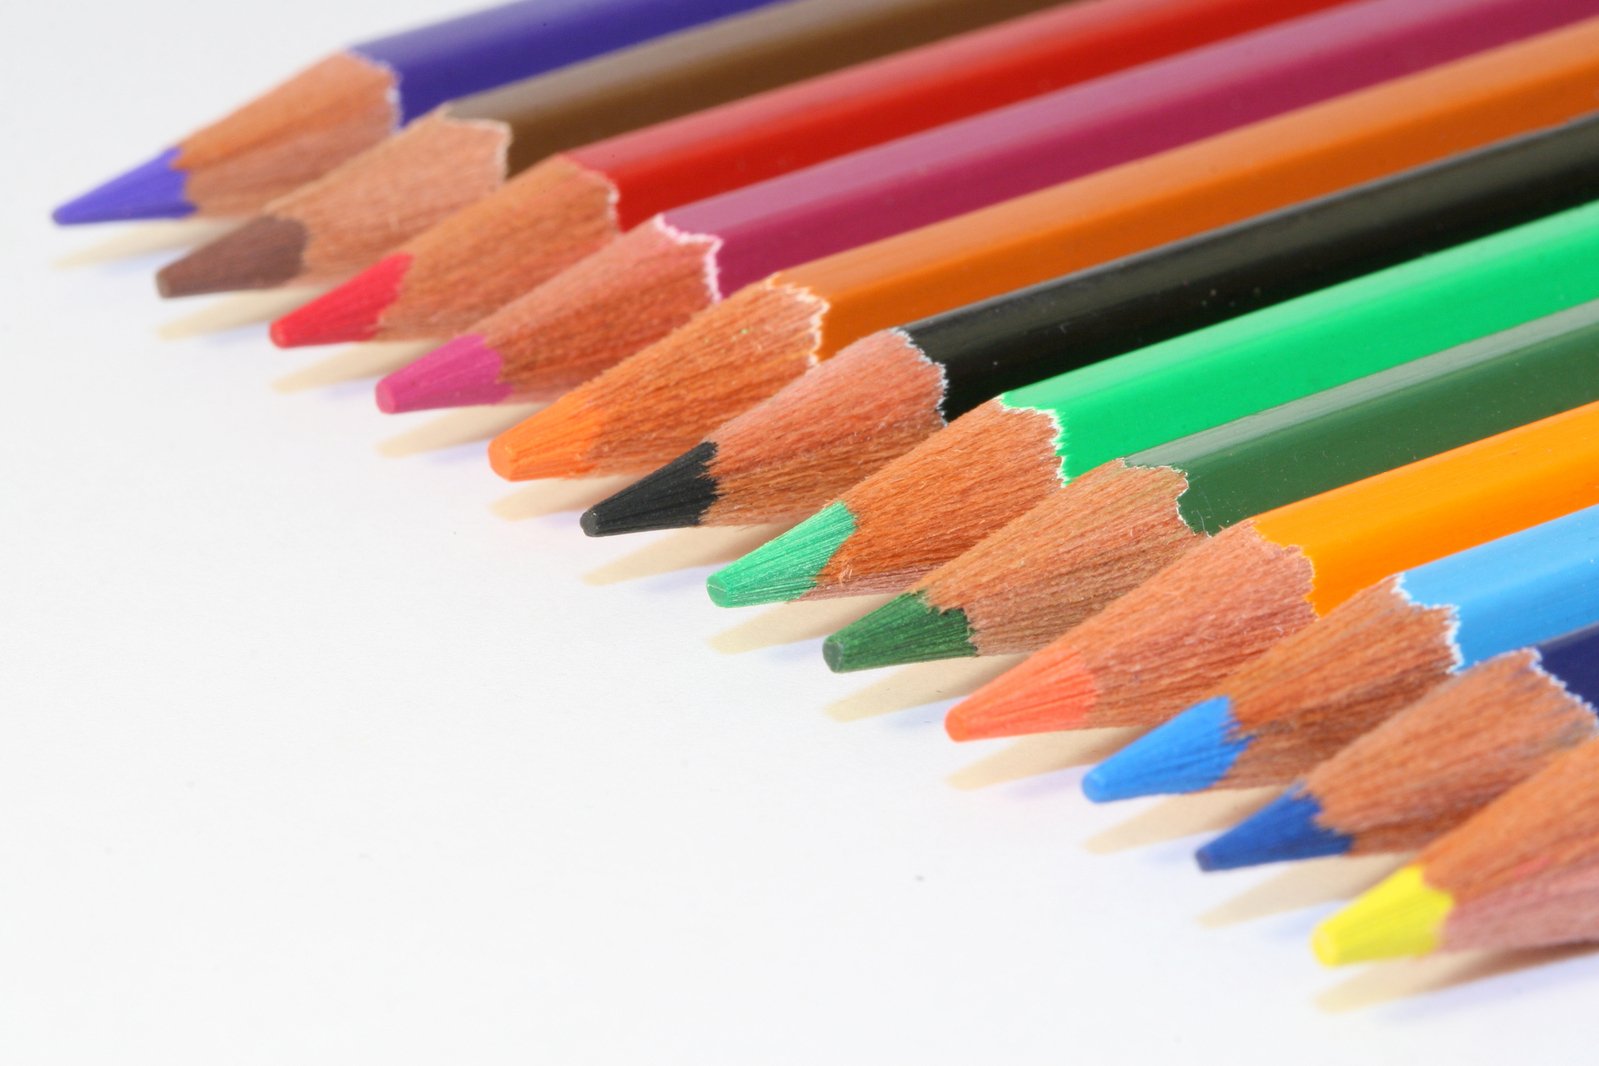 the colorful pencils are lined up neatly